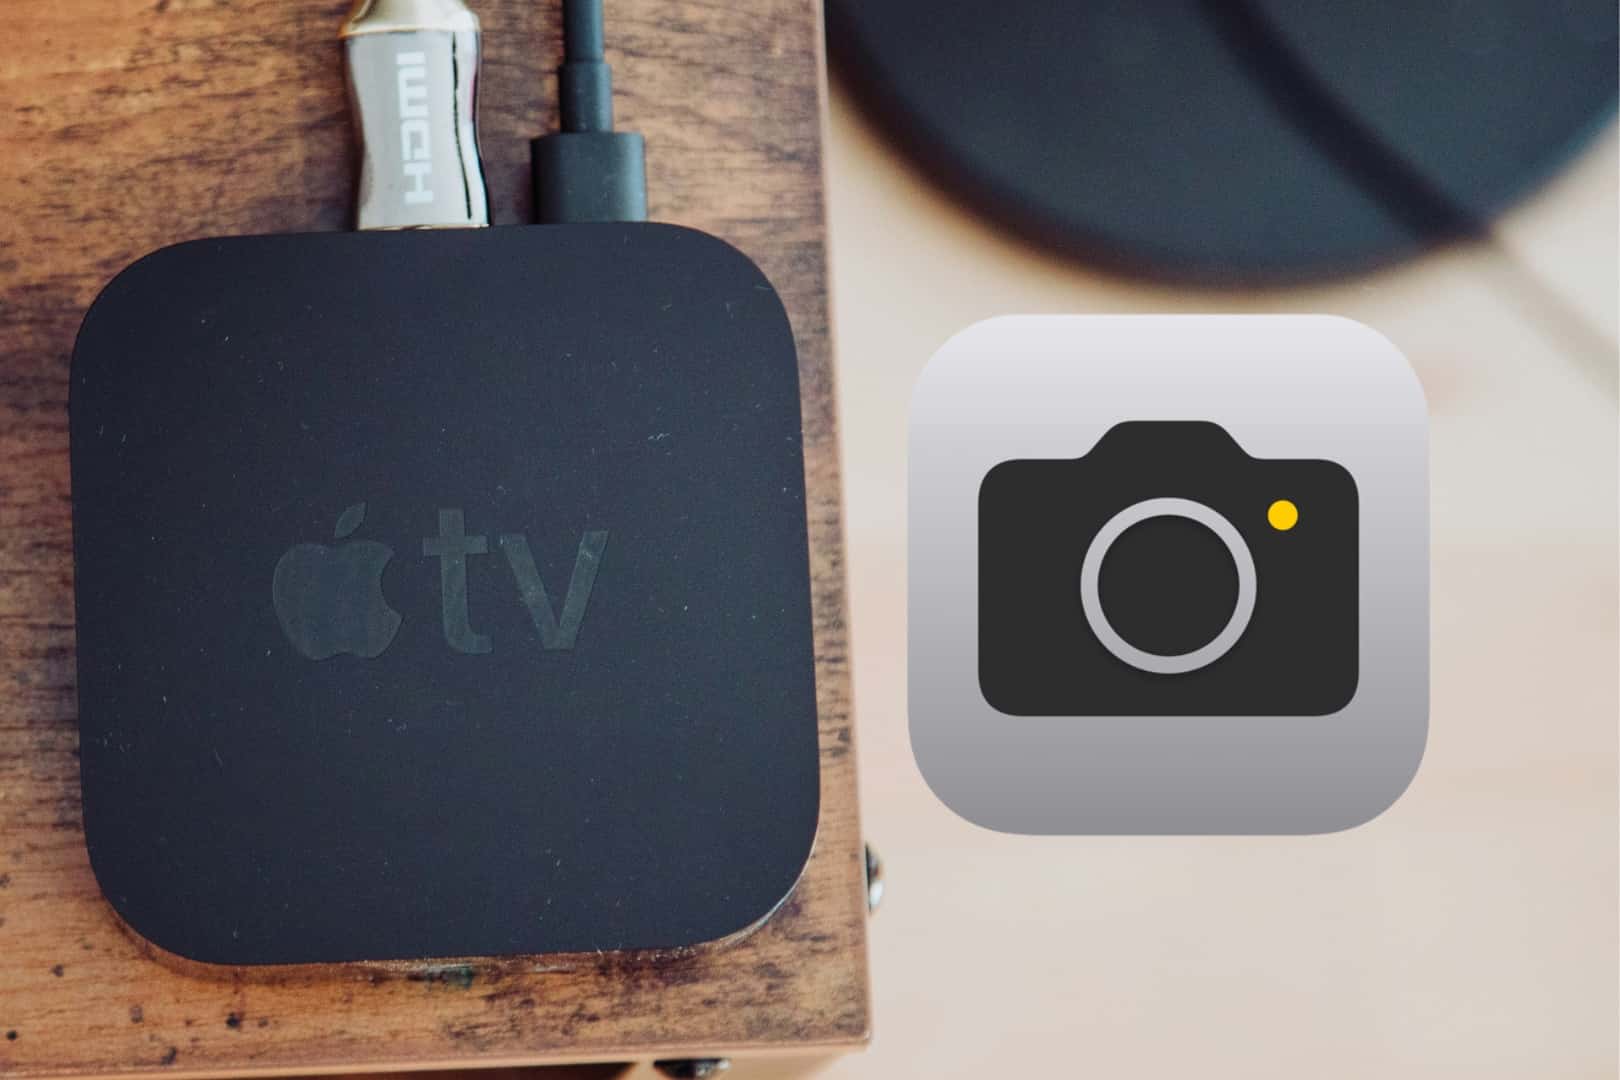 Apple TV with an iOS camera icon